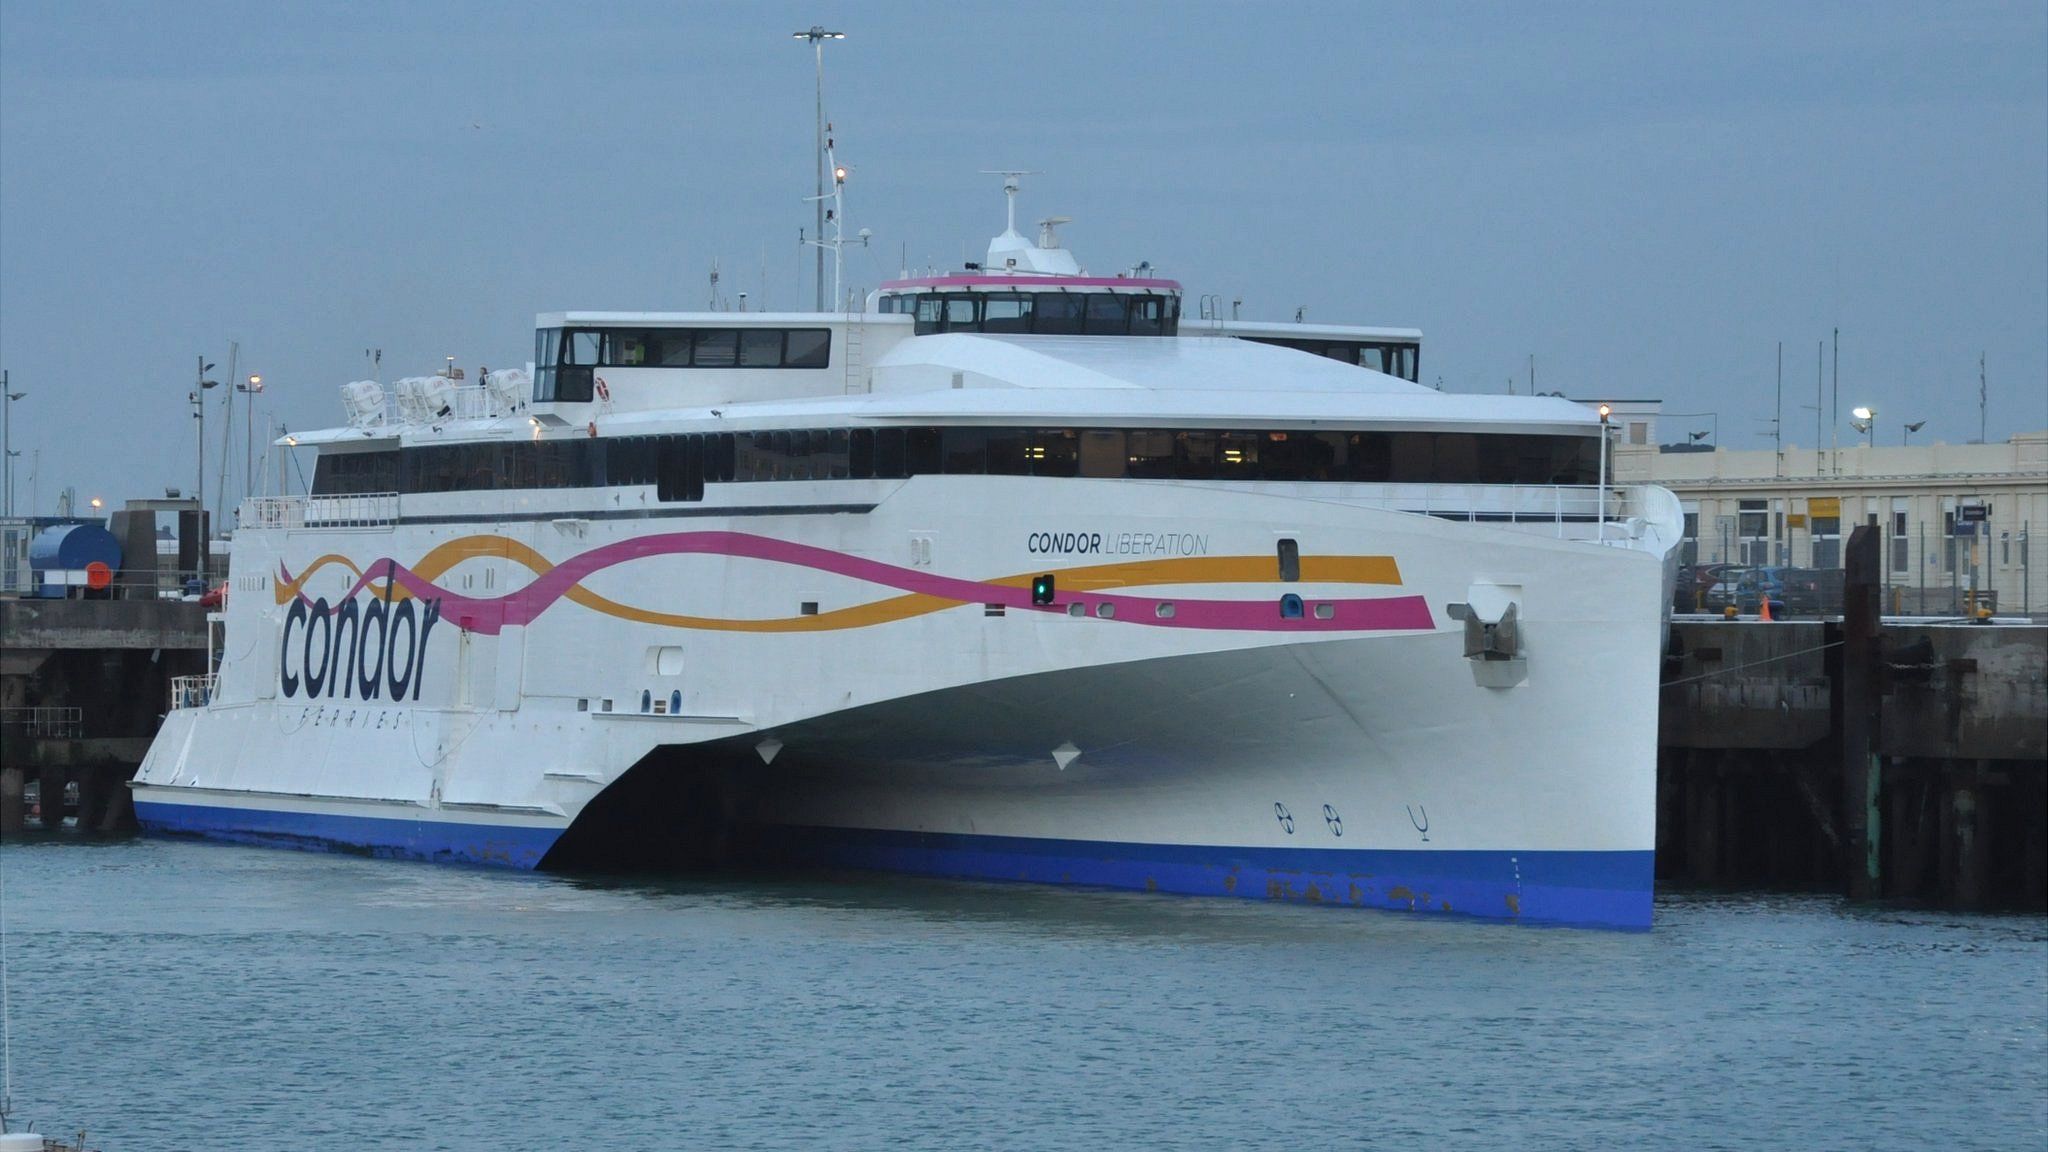 Condor Liberation in Guernsey's St Peter Port Harbour